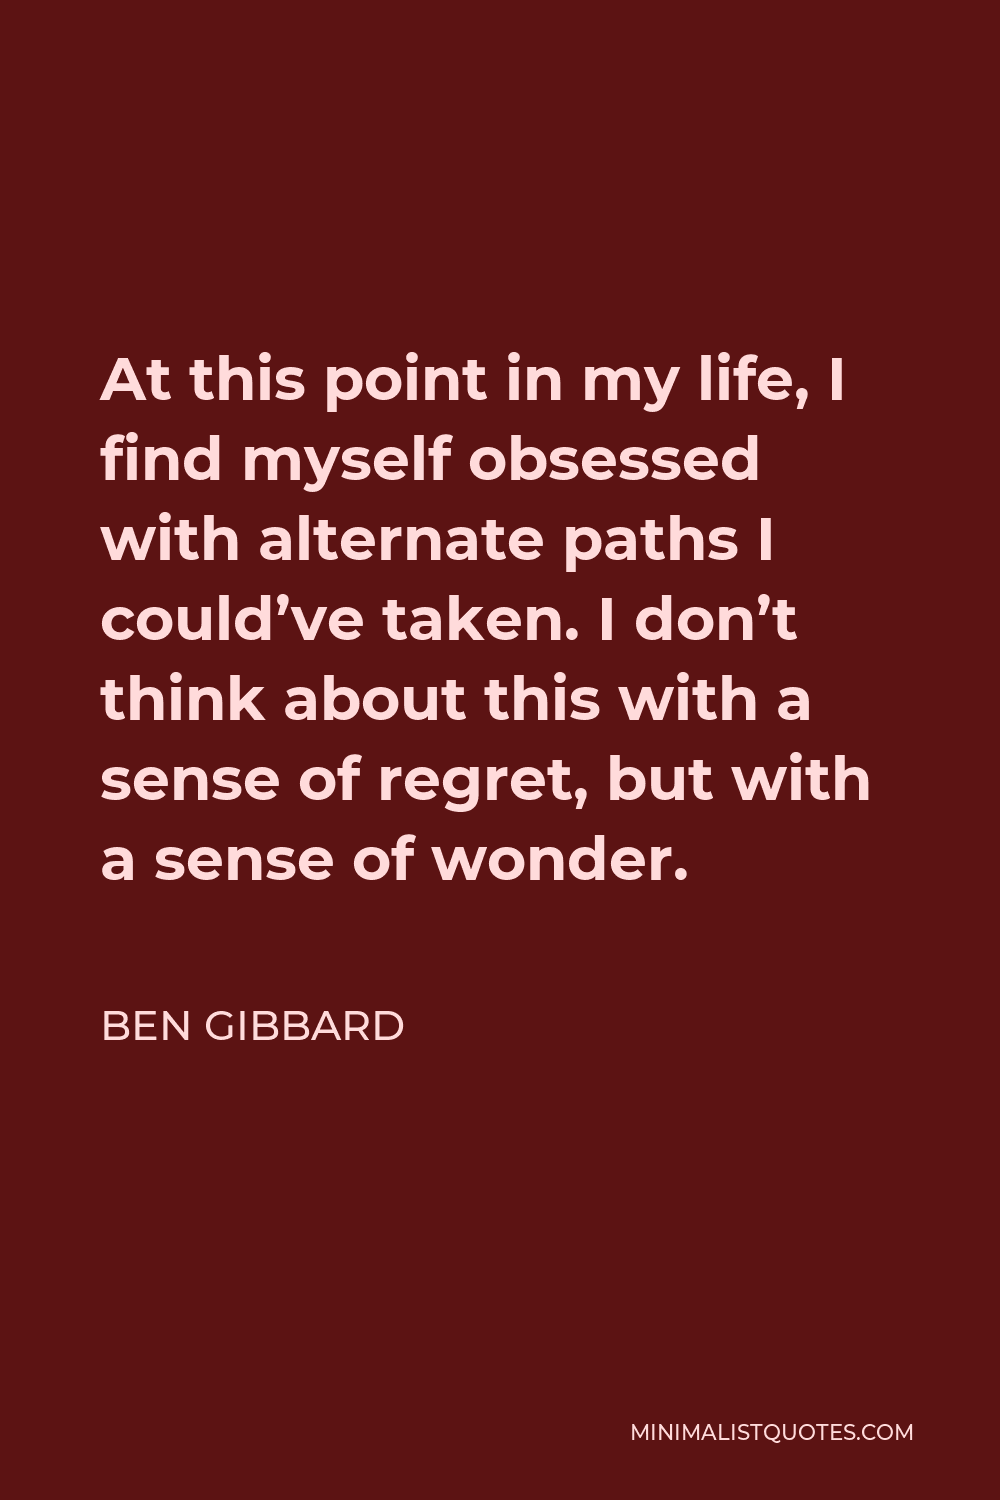 Ben Gibbard Quote - At this point in my life, I find myself obsessed with alternate paths I could’ve taken. I don’t think about this with a sense of regret, but with a sense of wonder.